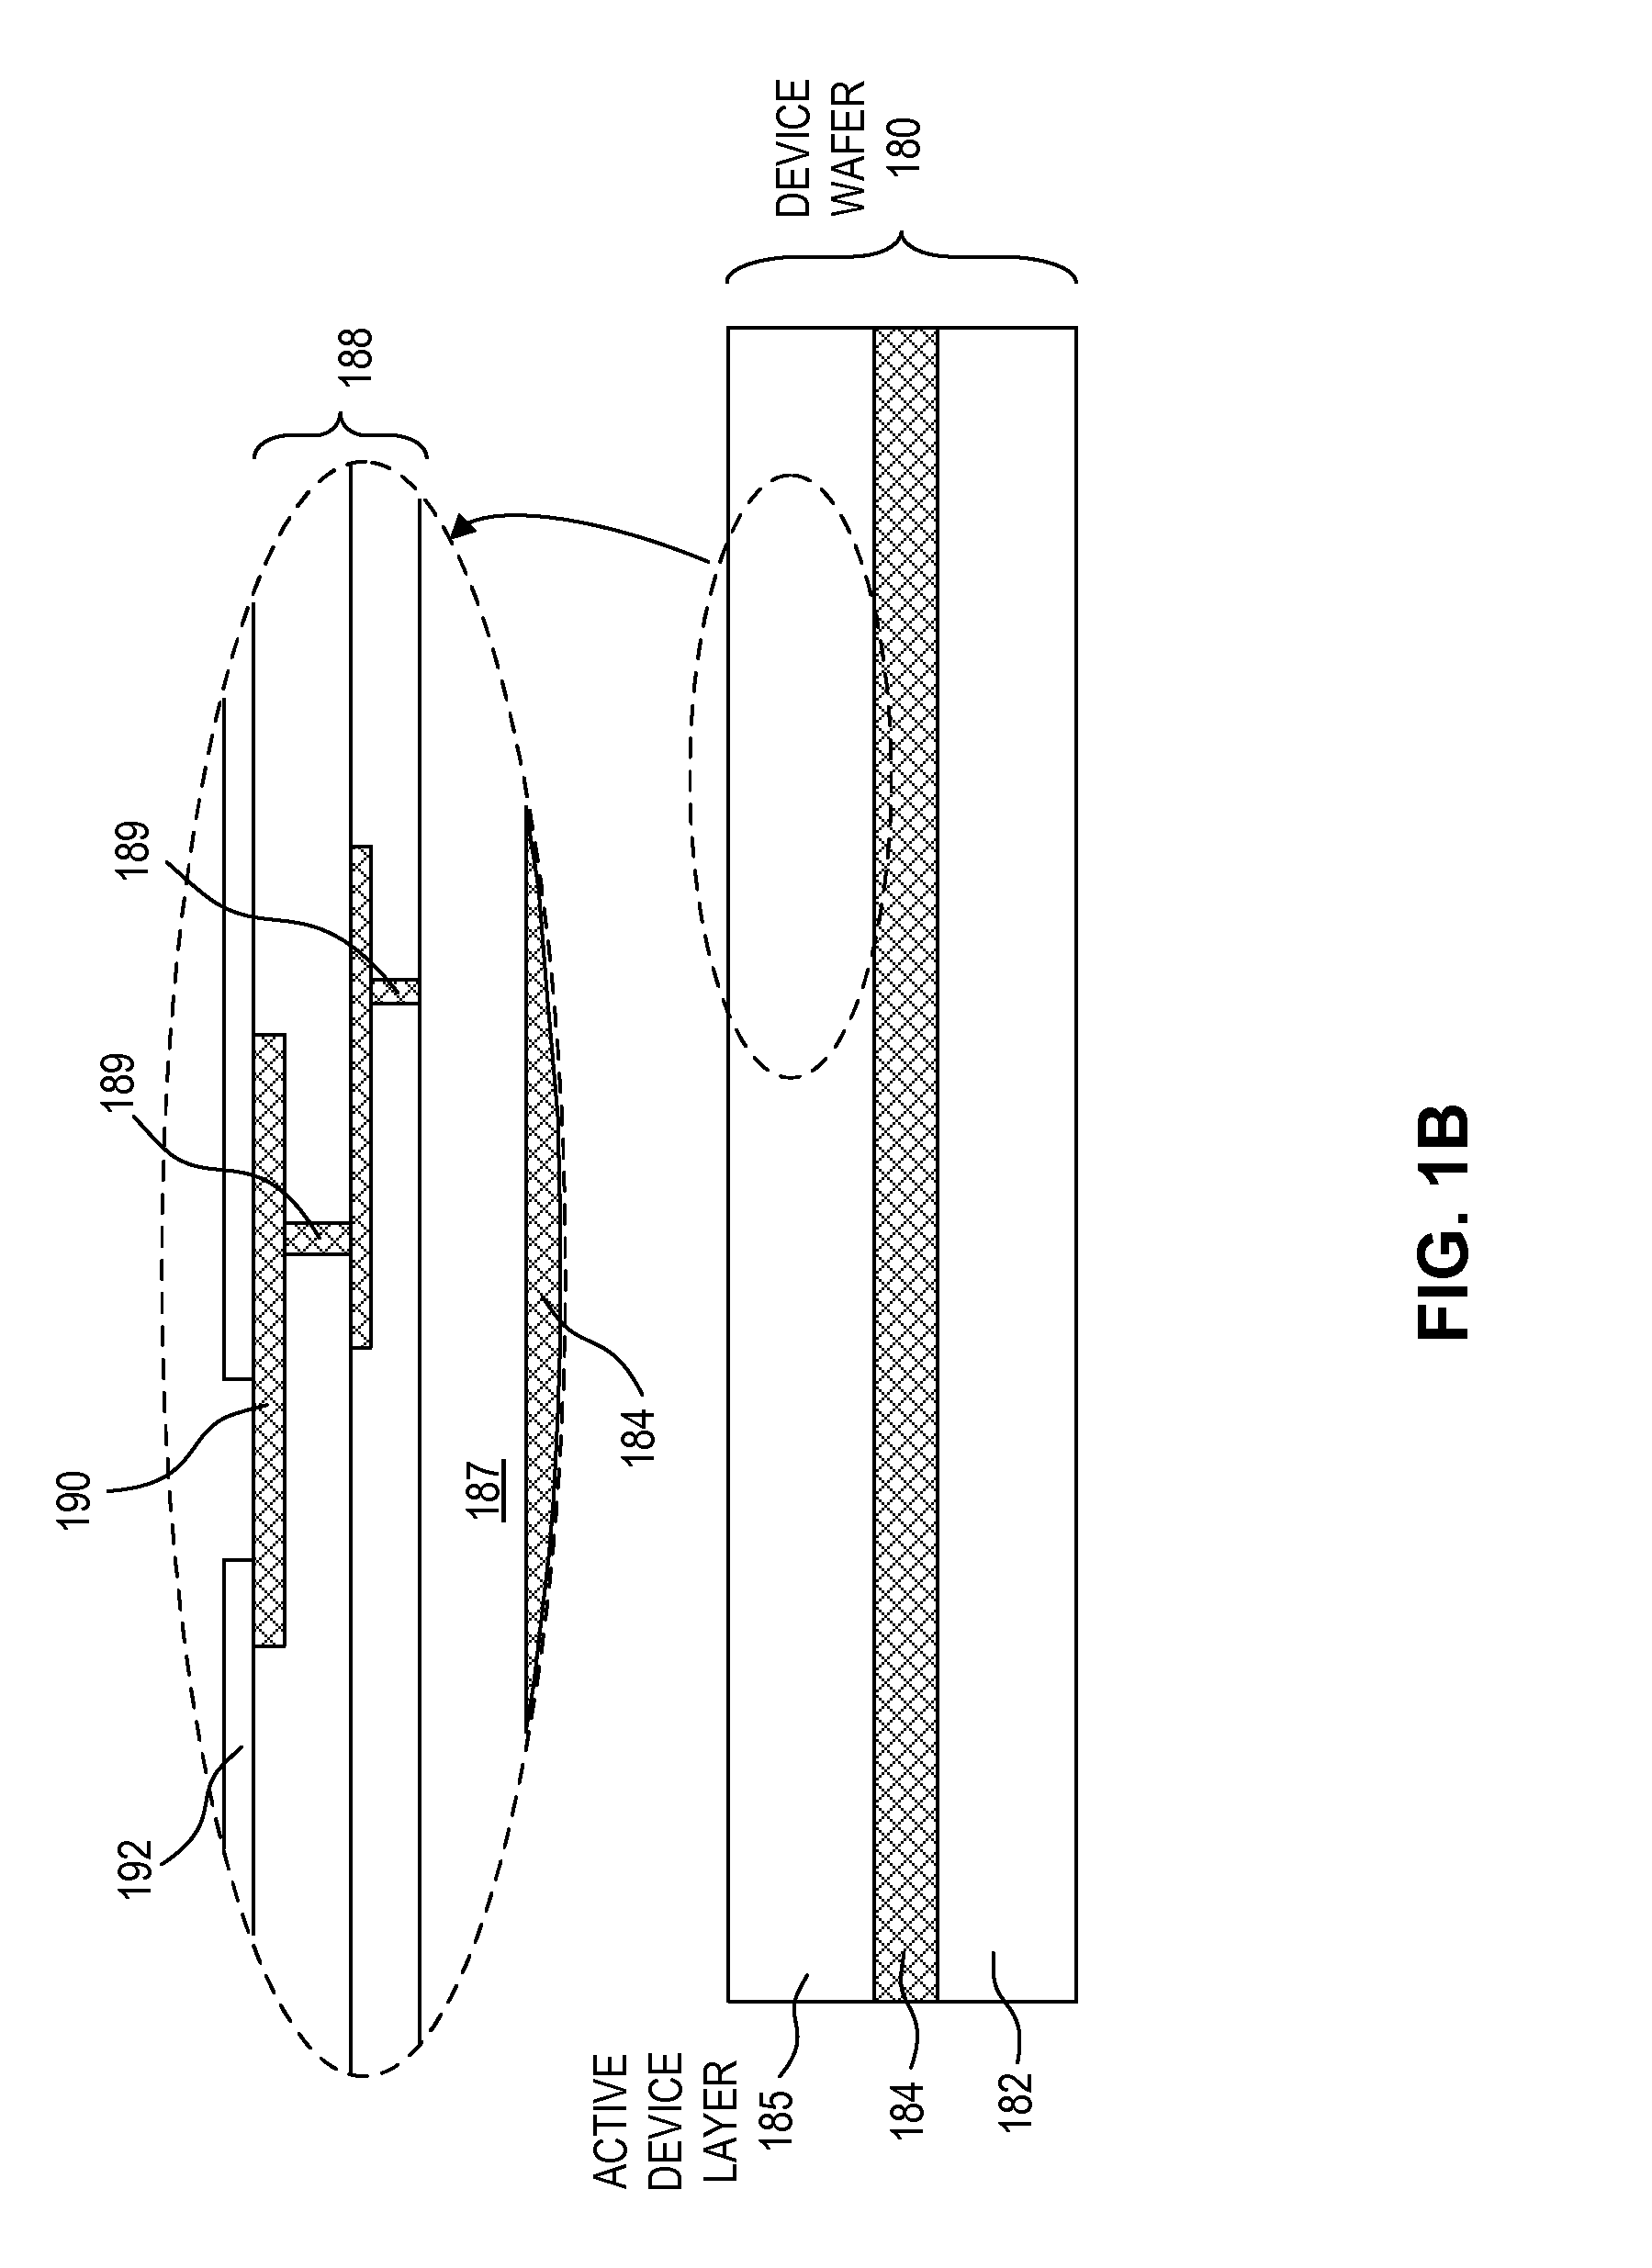 Micro device with stabilization post